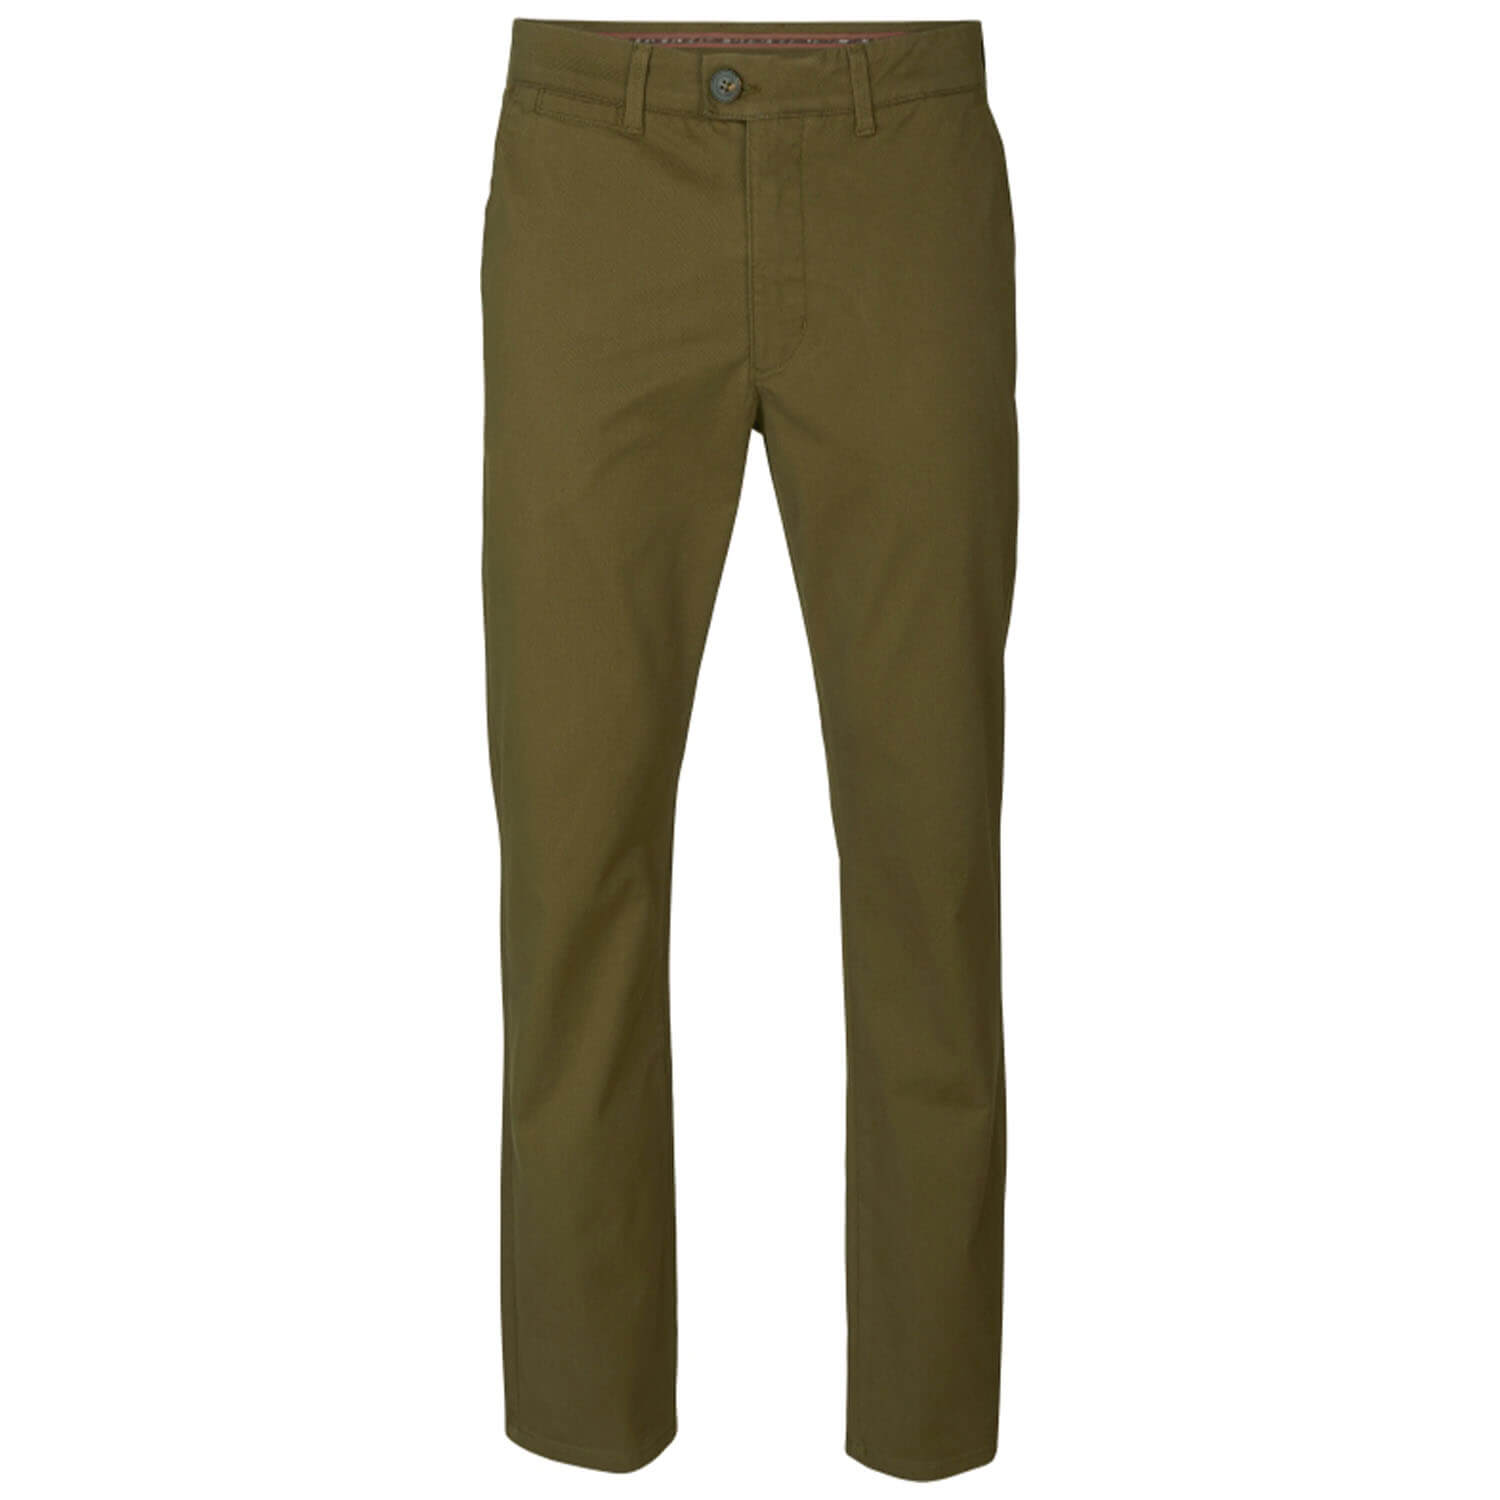 Härkila hunting trousers norberg (Beech green) - Hunting Trousers